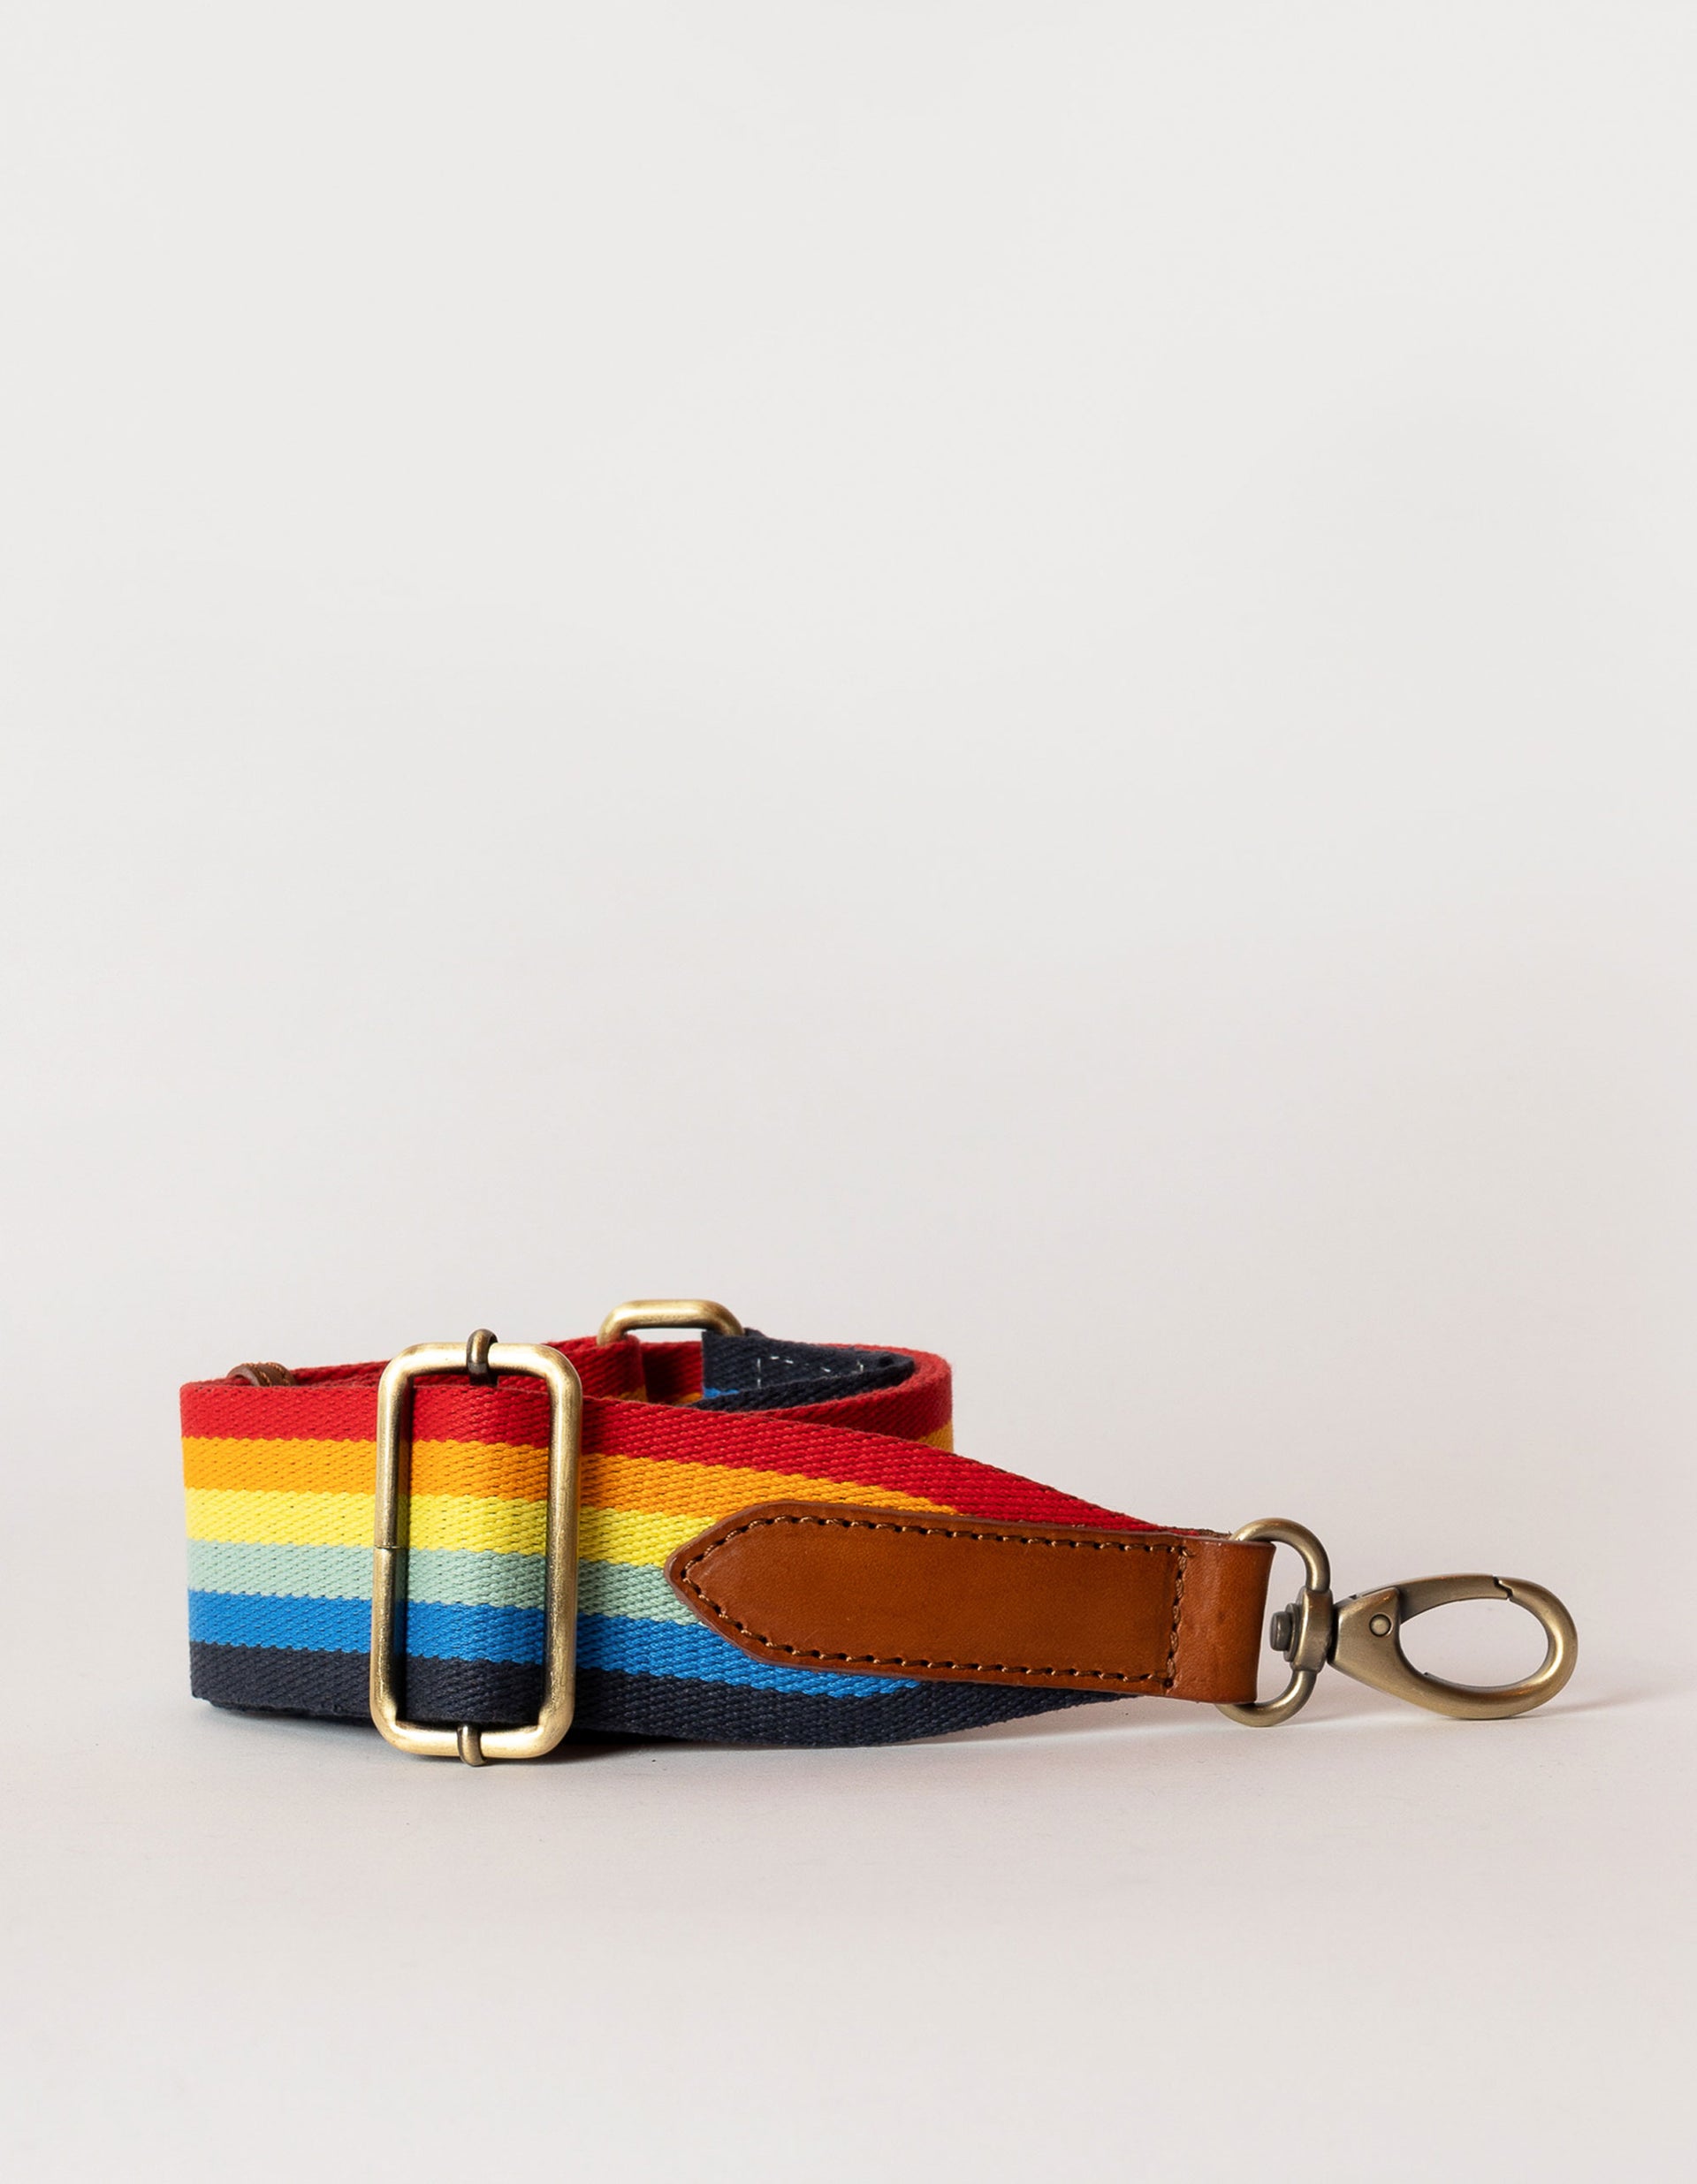 Rainbow webbing strap in cognac classic leather